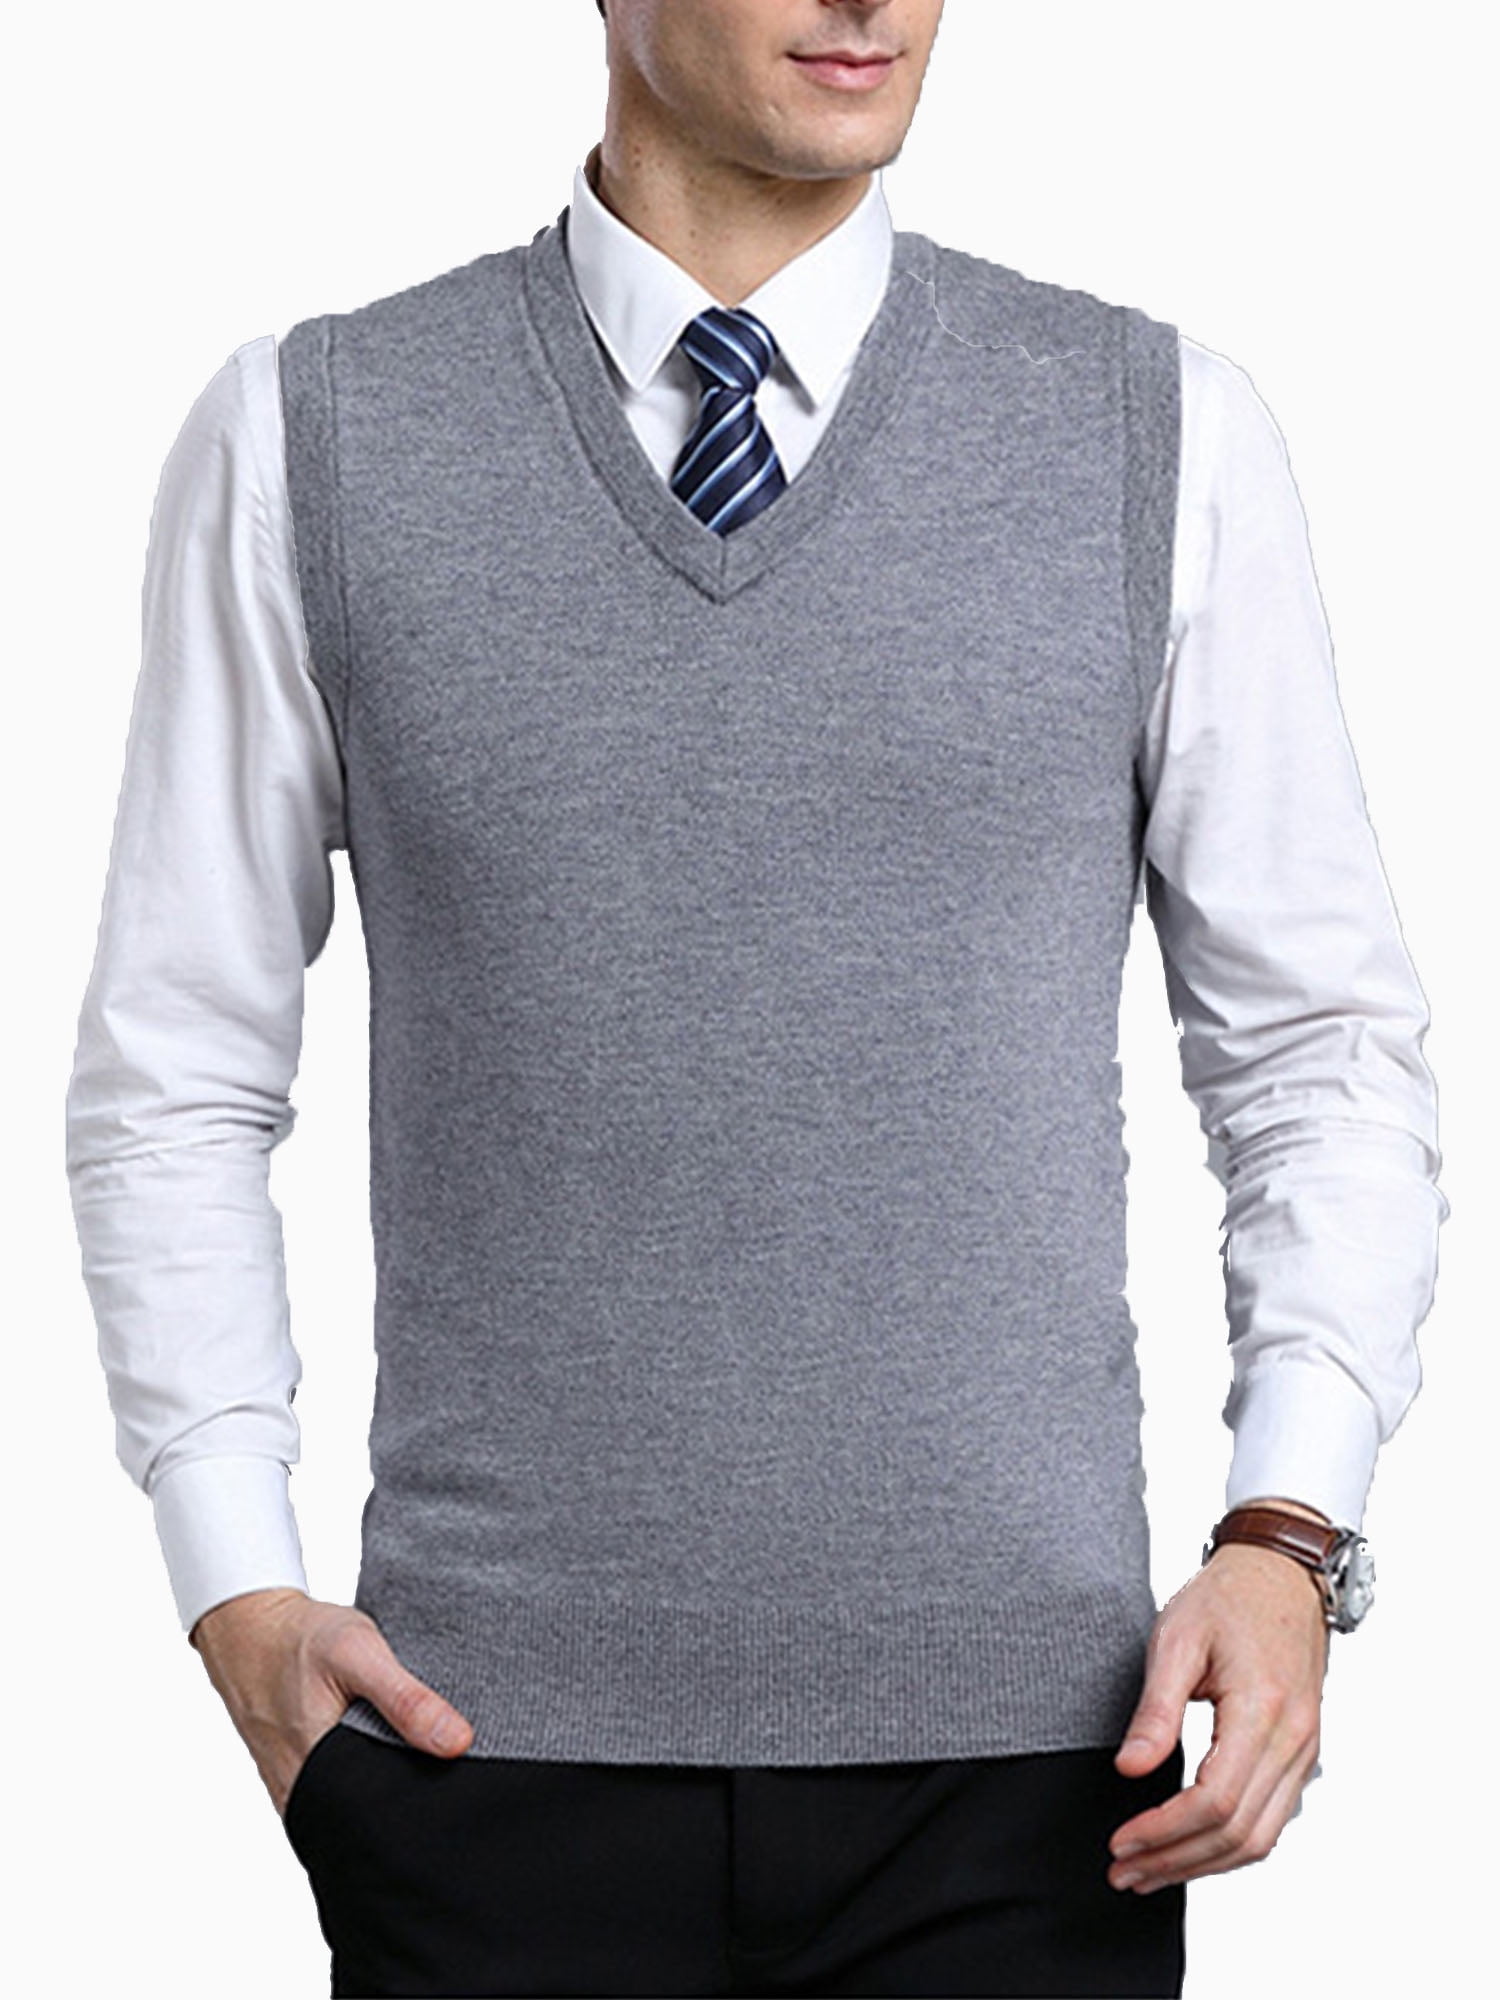 WAWAYA Men Knitted Casual Slim Fit Long Sleeve Crew Neck Contrast Pullover Sweater 